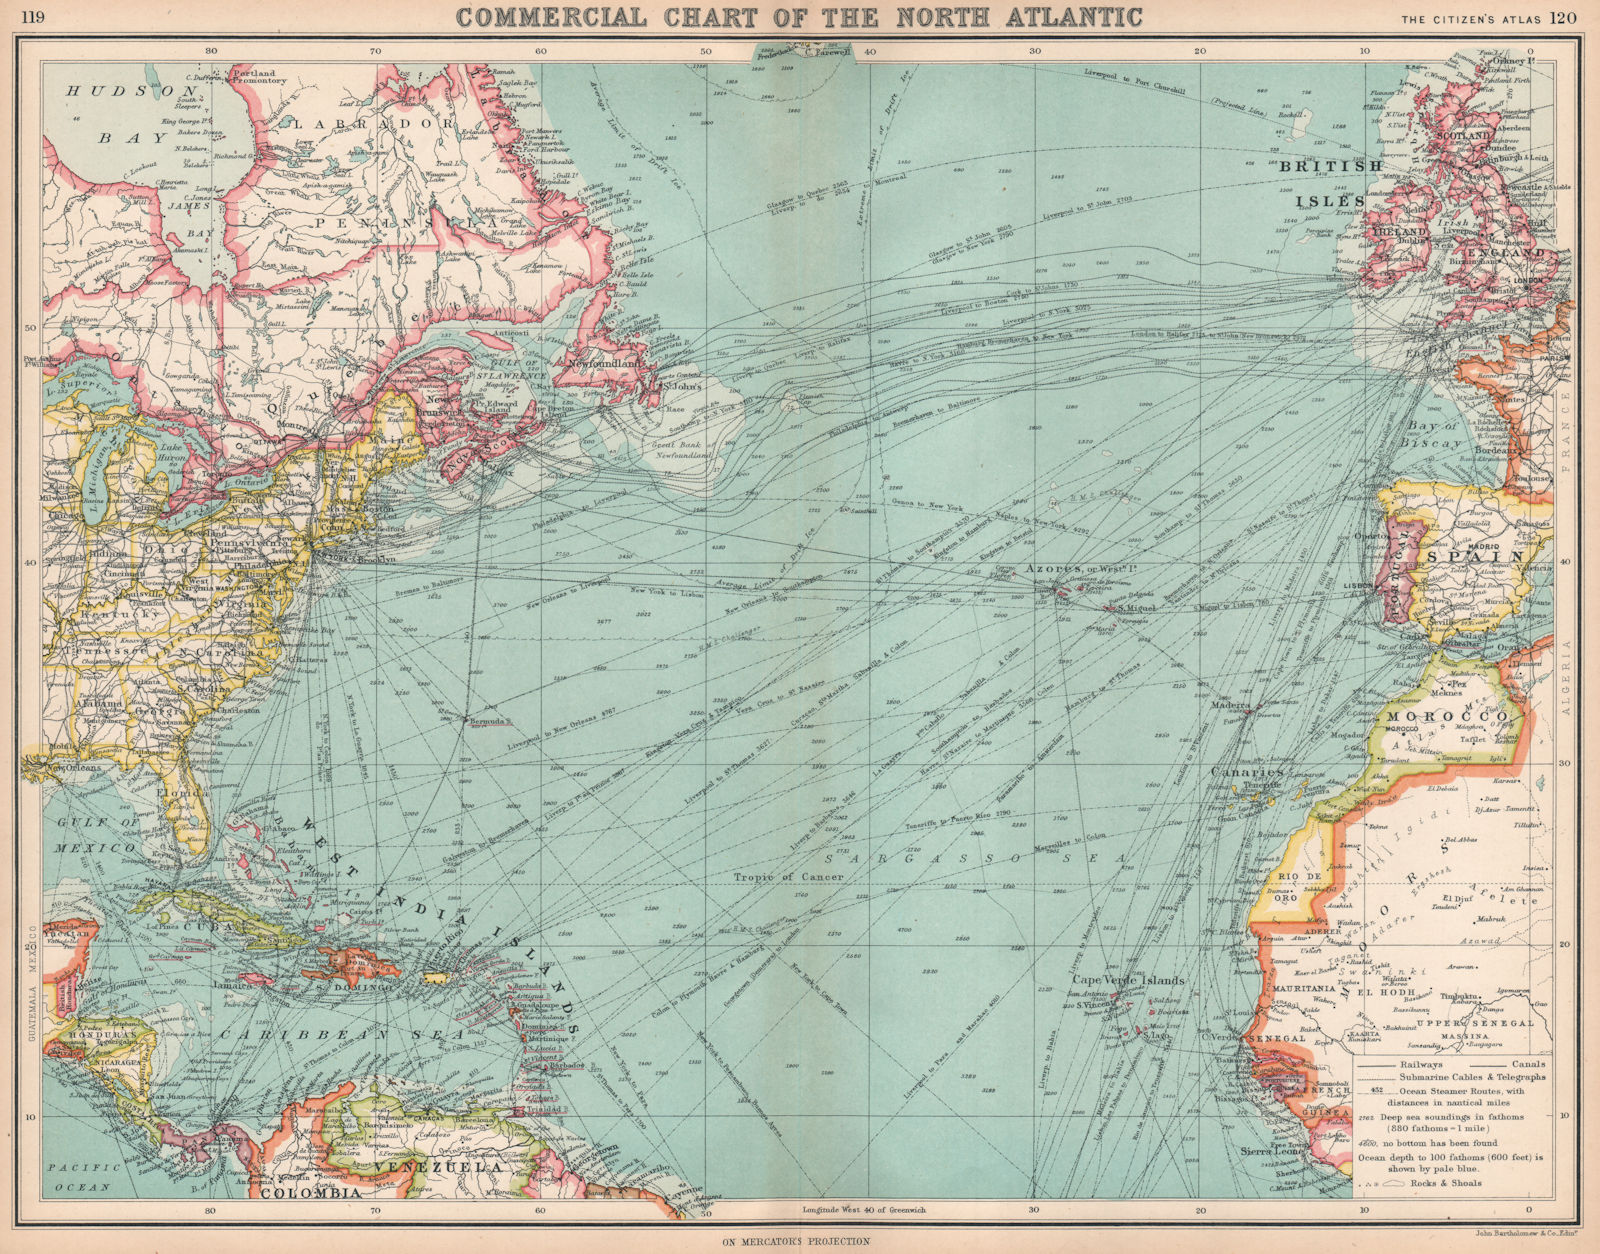 NORTH ATLANTIC COMMERCIAL Steamer routes Telegraphs Soundings Ice limit 1912 map